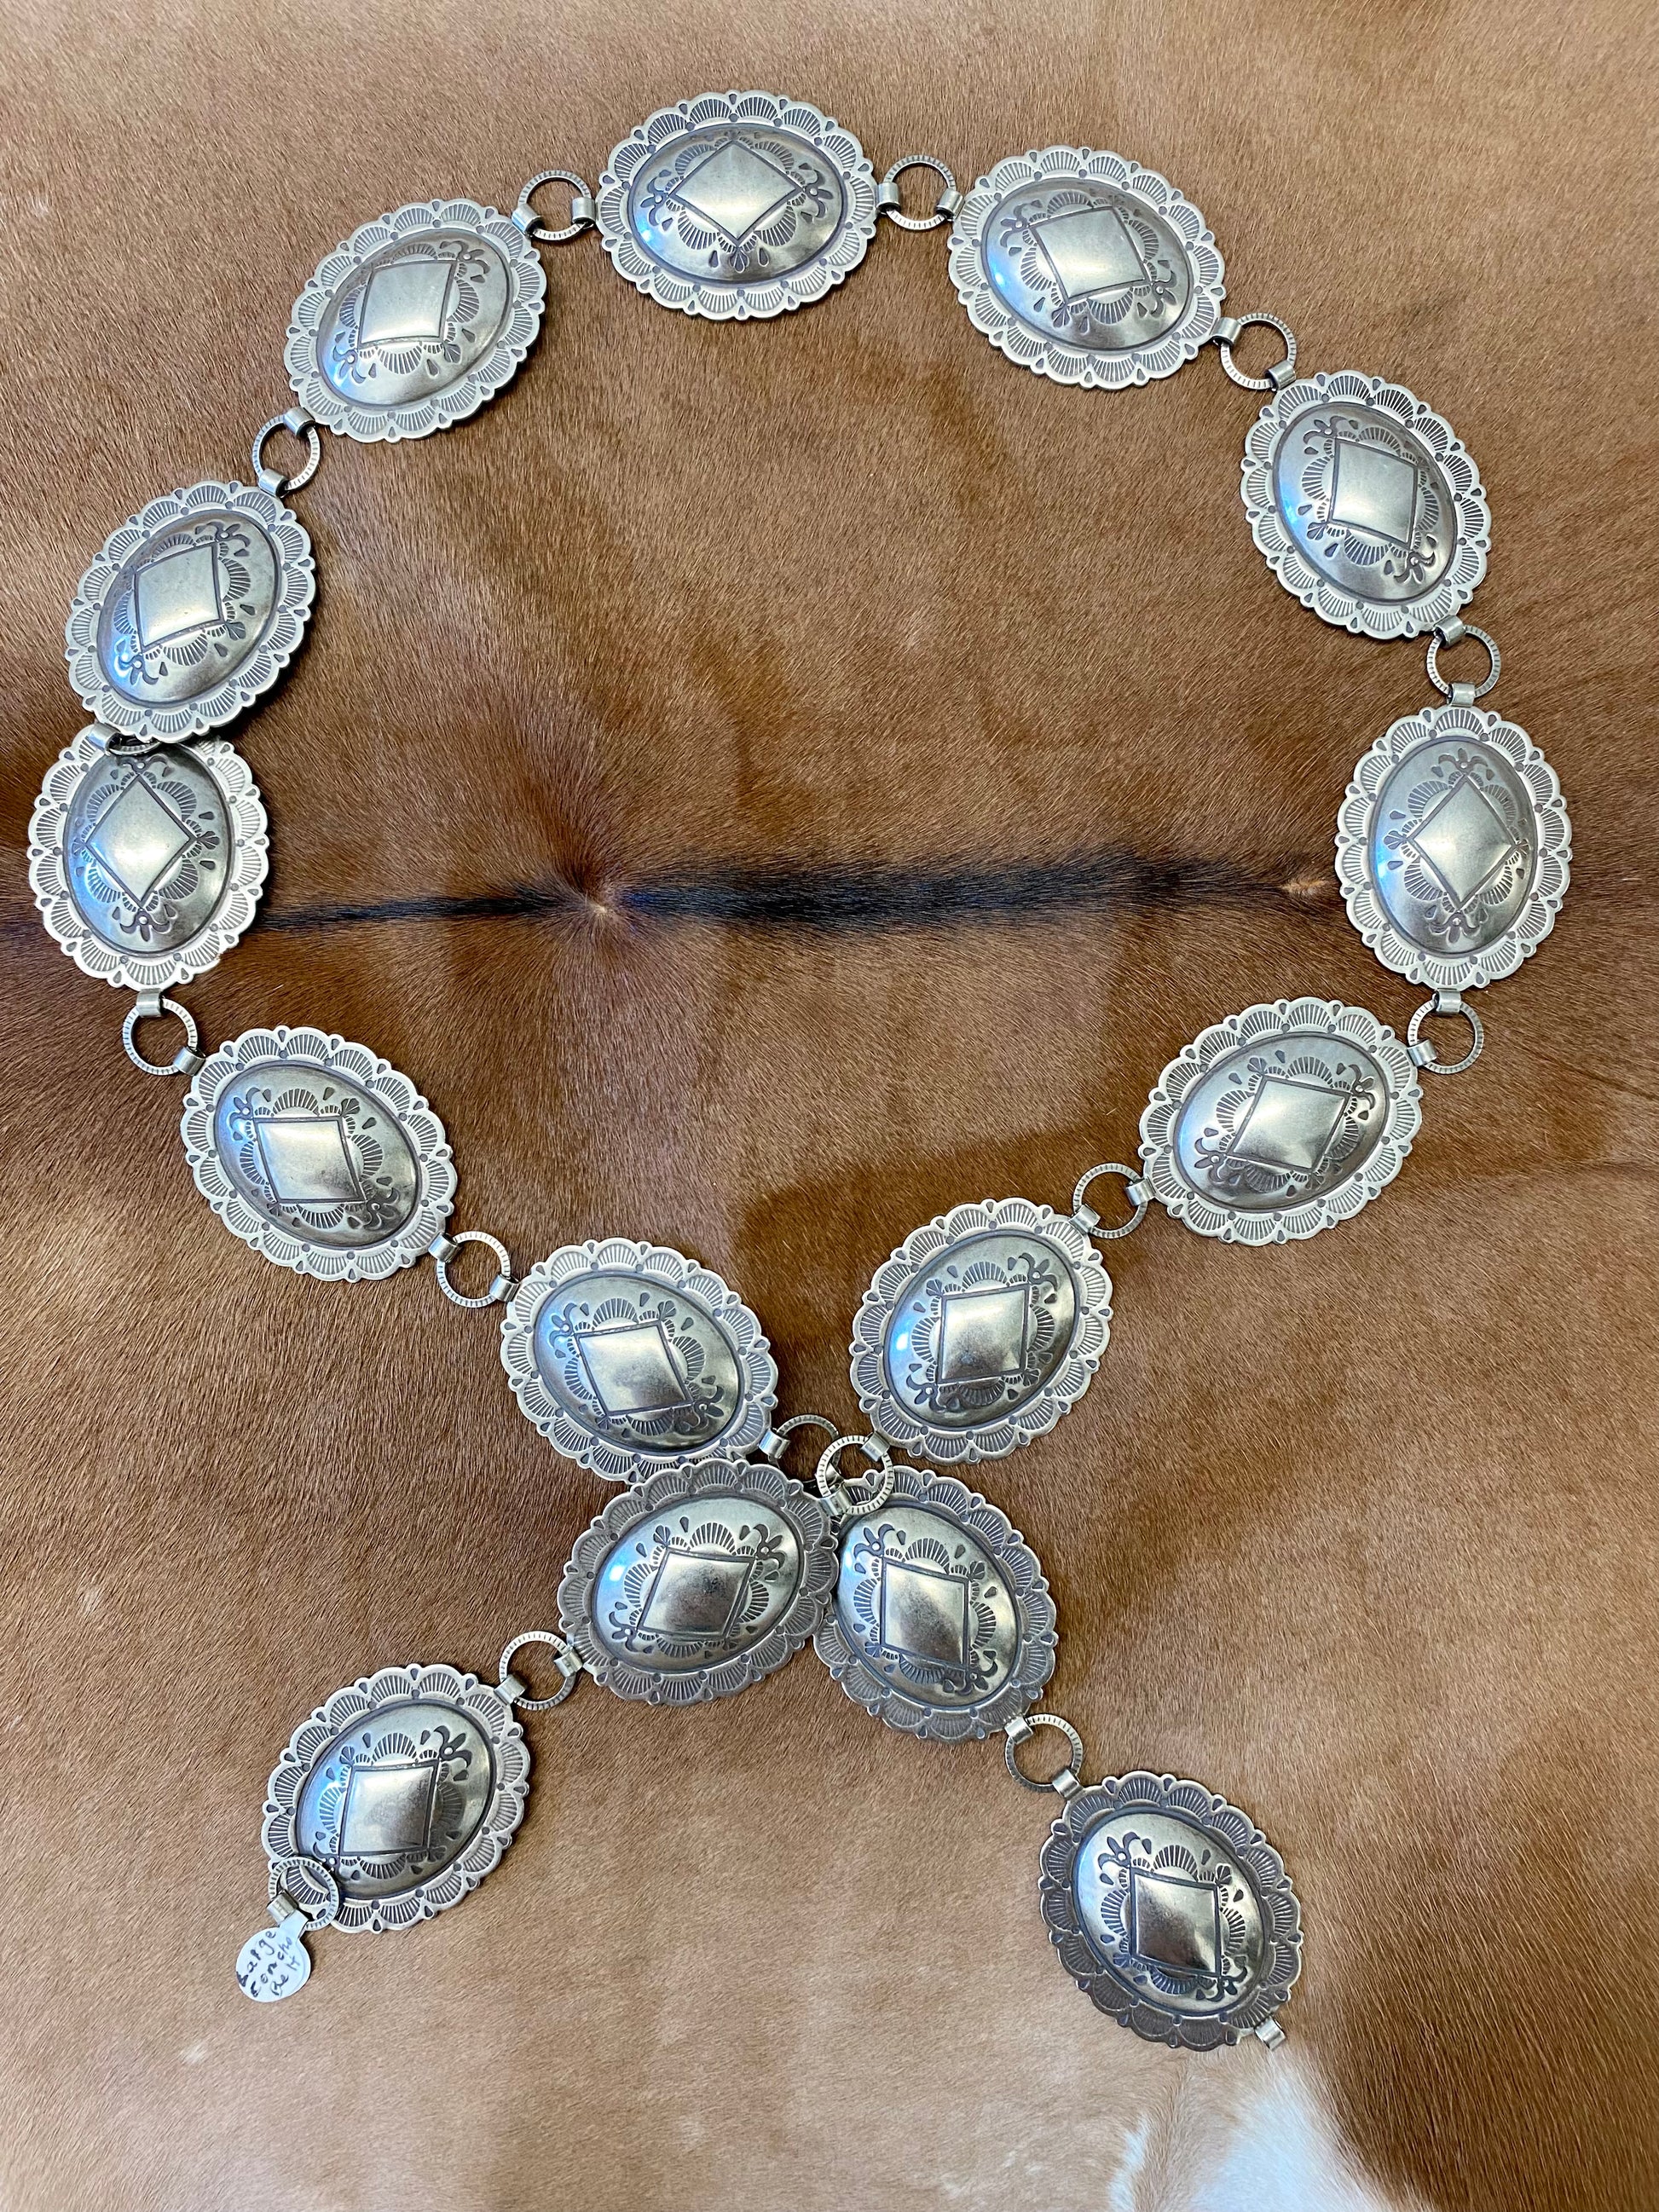 Beautiful 15 piece concho Nickle silver belt. This belt is adjustable as you can latch it on to any of the round pieces in-between the concho pieces. Each concho piece has a design etched on to it. This belt is amazing and will go so well with any outfit. Everyone needs a concho belt in their accessory wardrobe.   Size: 42” inches   15 Concho pieces each 1.75” x 2” inches 